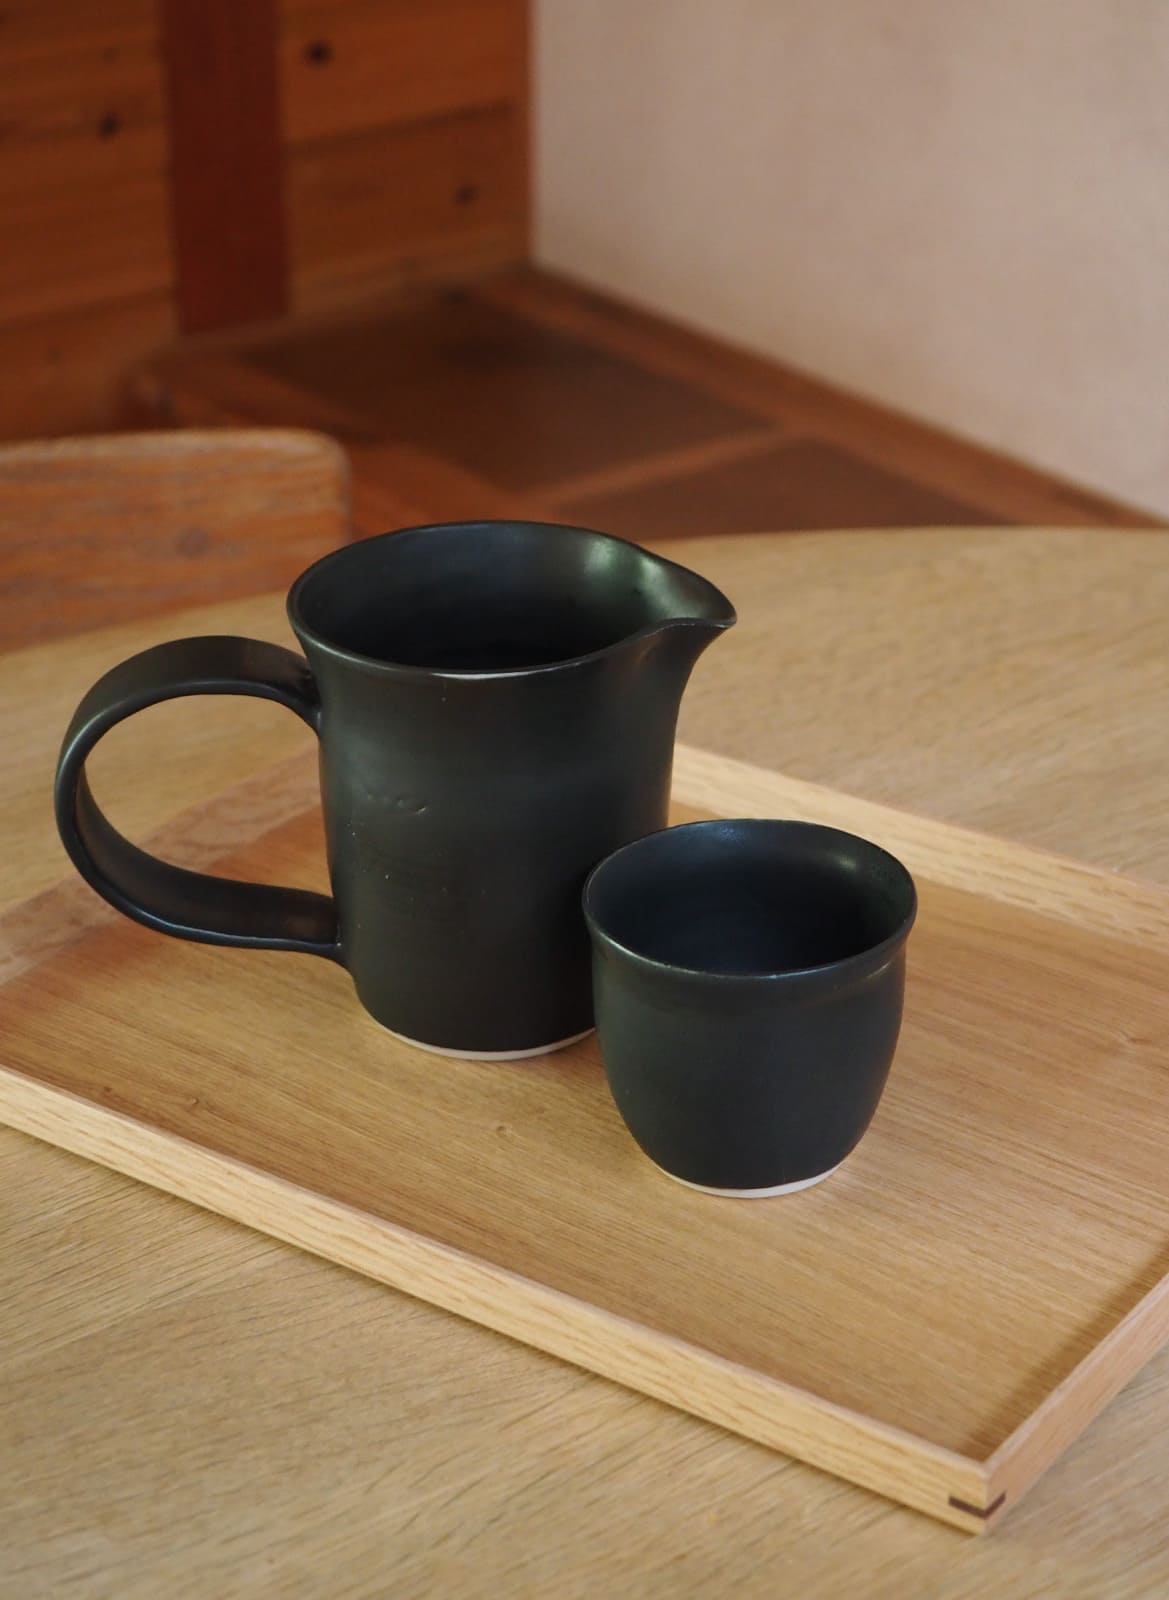 handmade black ceramic jug and cup standing on a wooden table